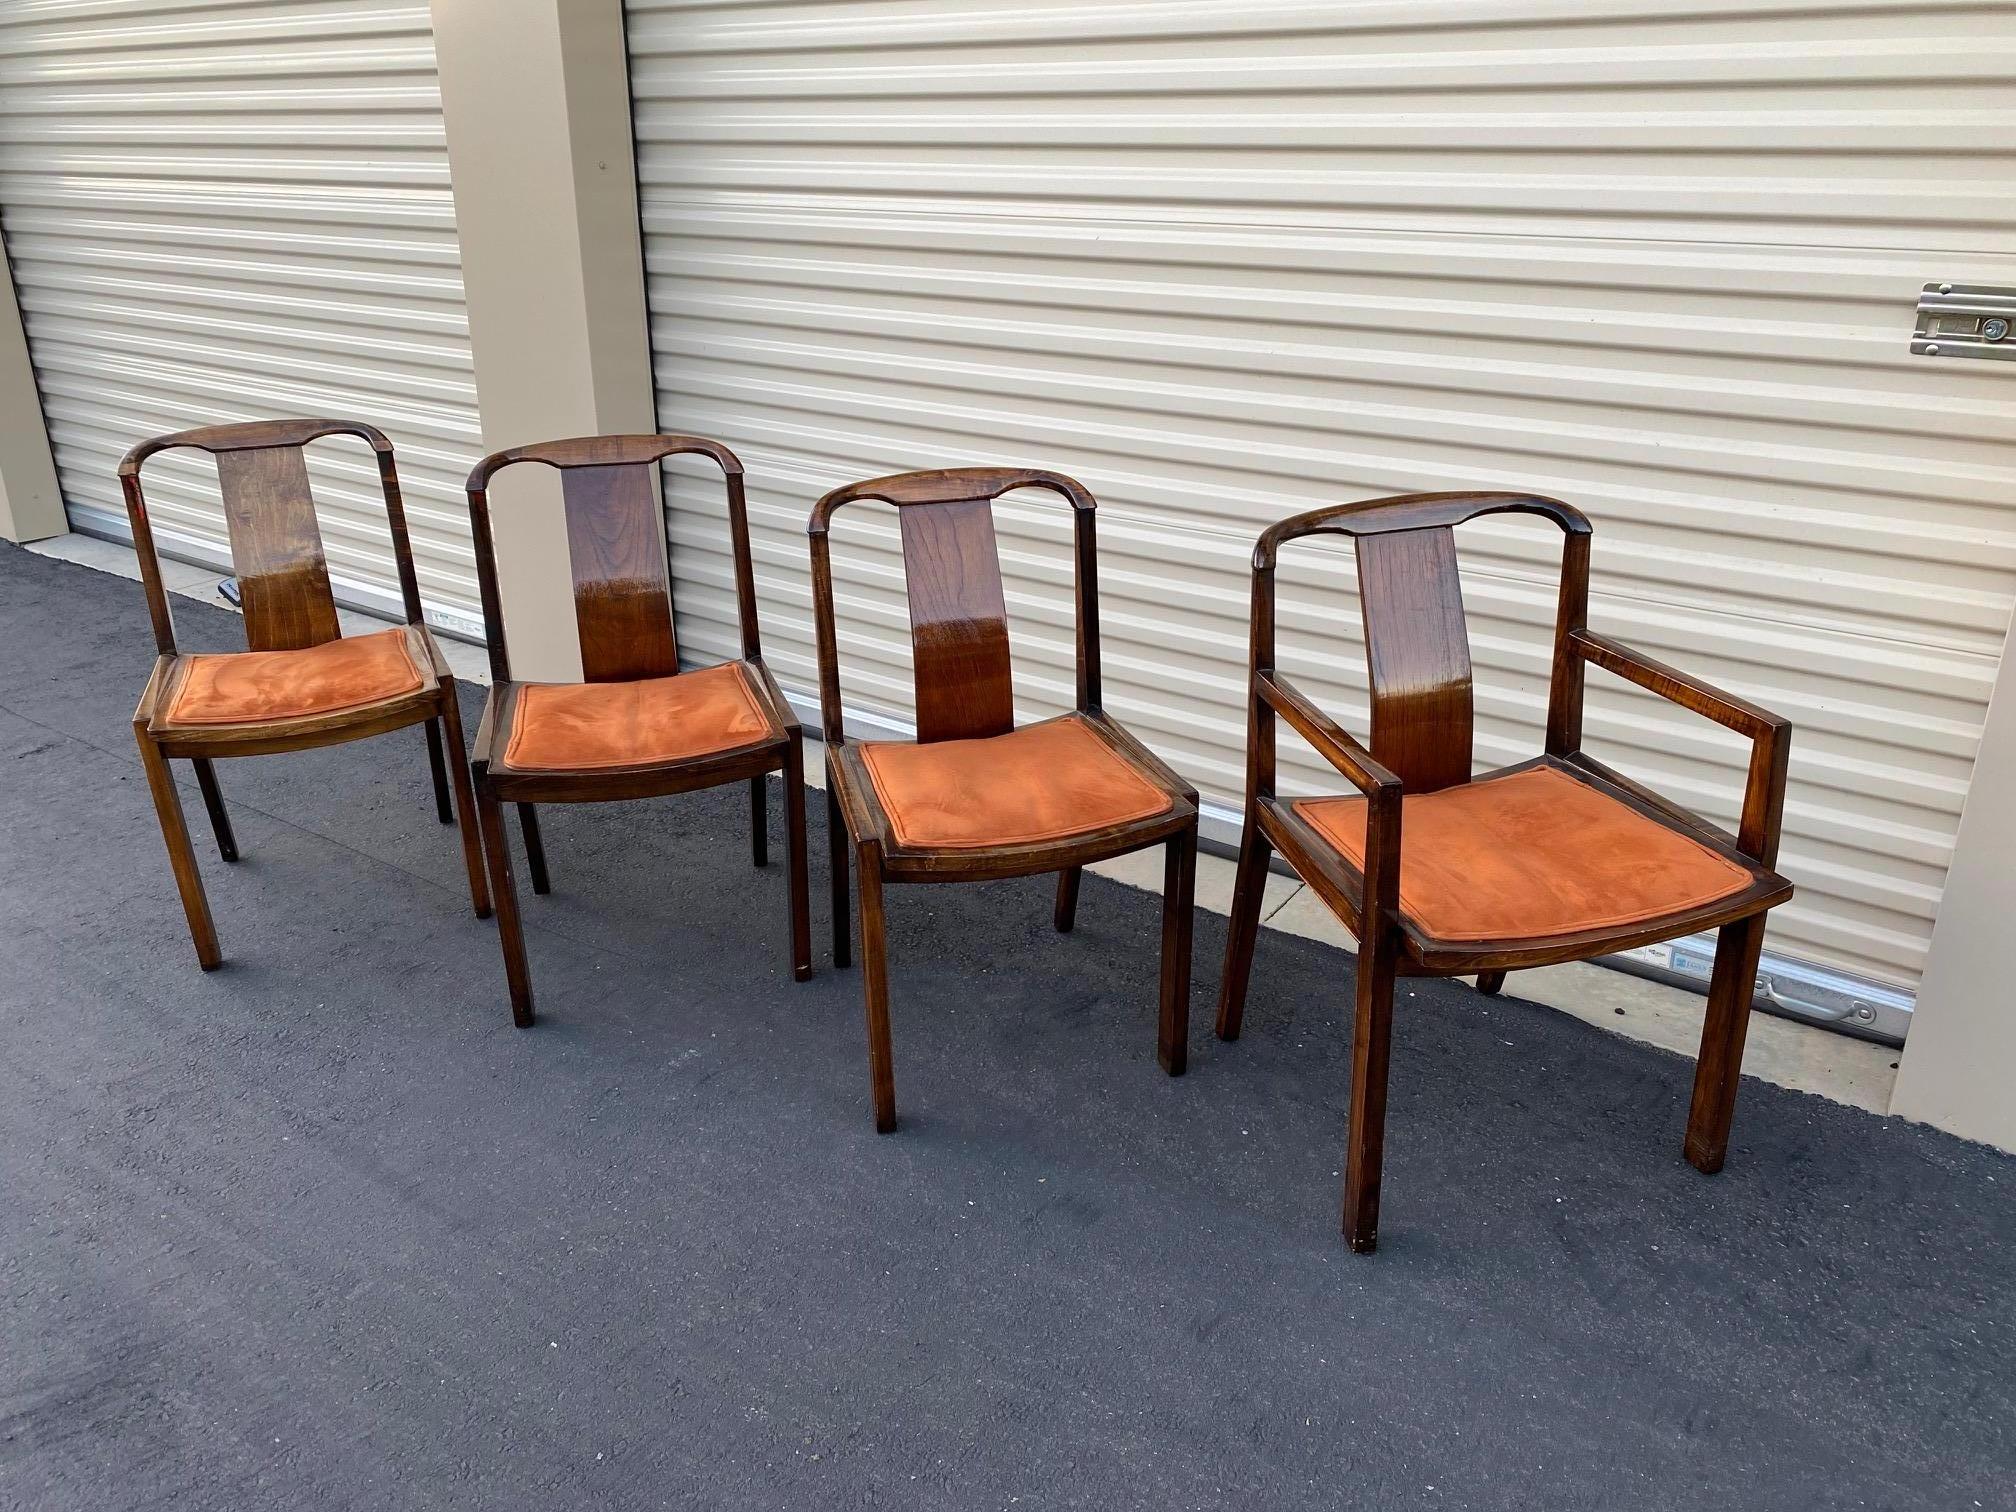 Beautiful set of 4 Baker Furniture Co. Mid-Century Modern dining chairs. These gorgeous chairs have clean and modern lines. With Minor wear consistent with age. One captains chair along with 3 armless chairs. Beautiful vibrant orange velvet seats.